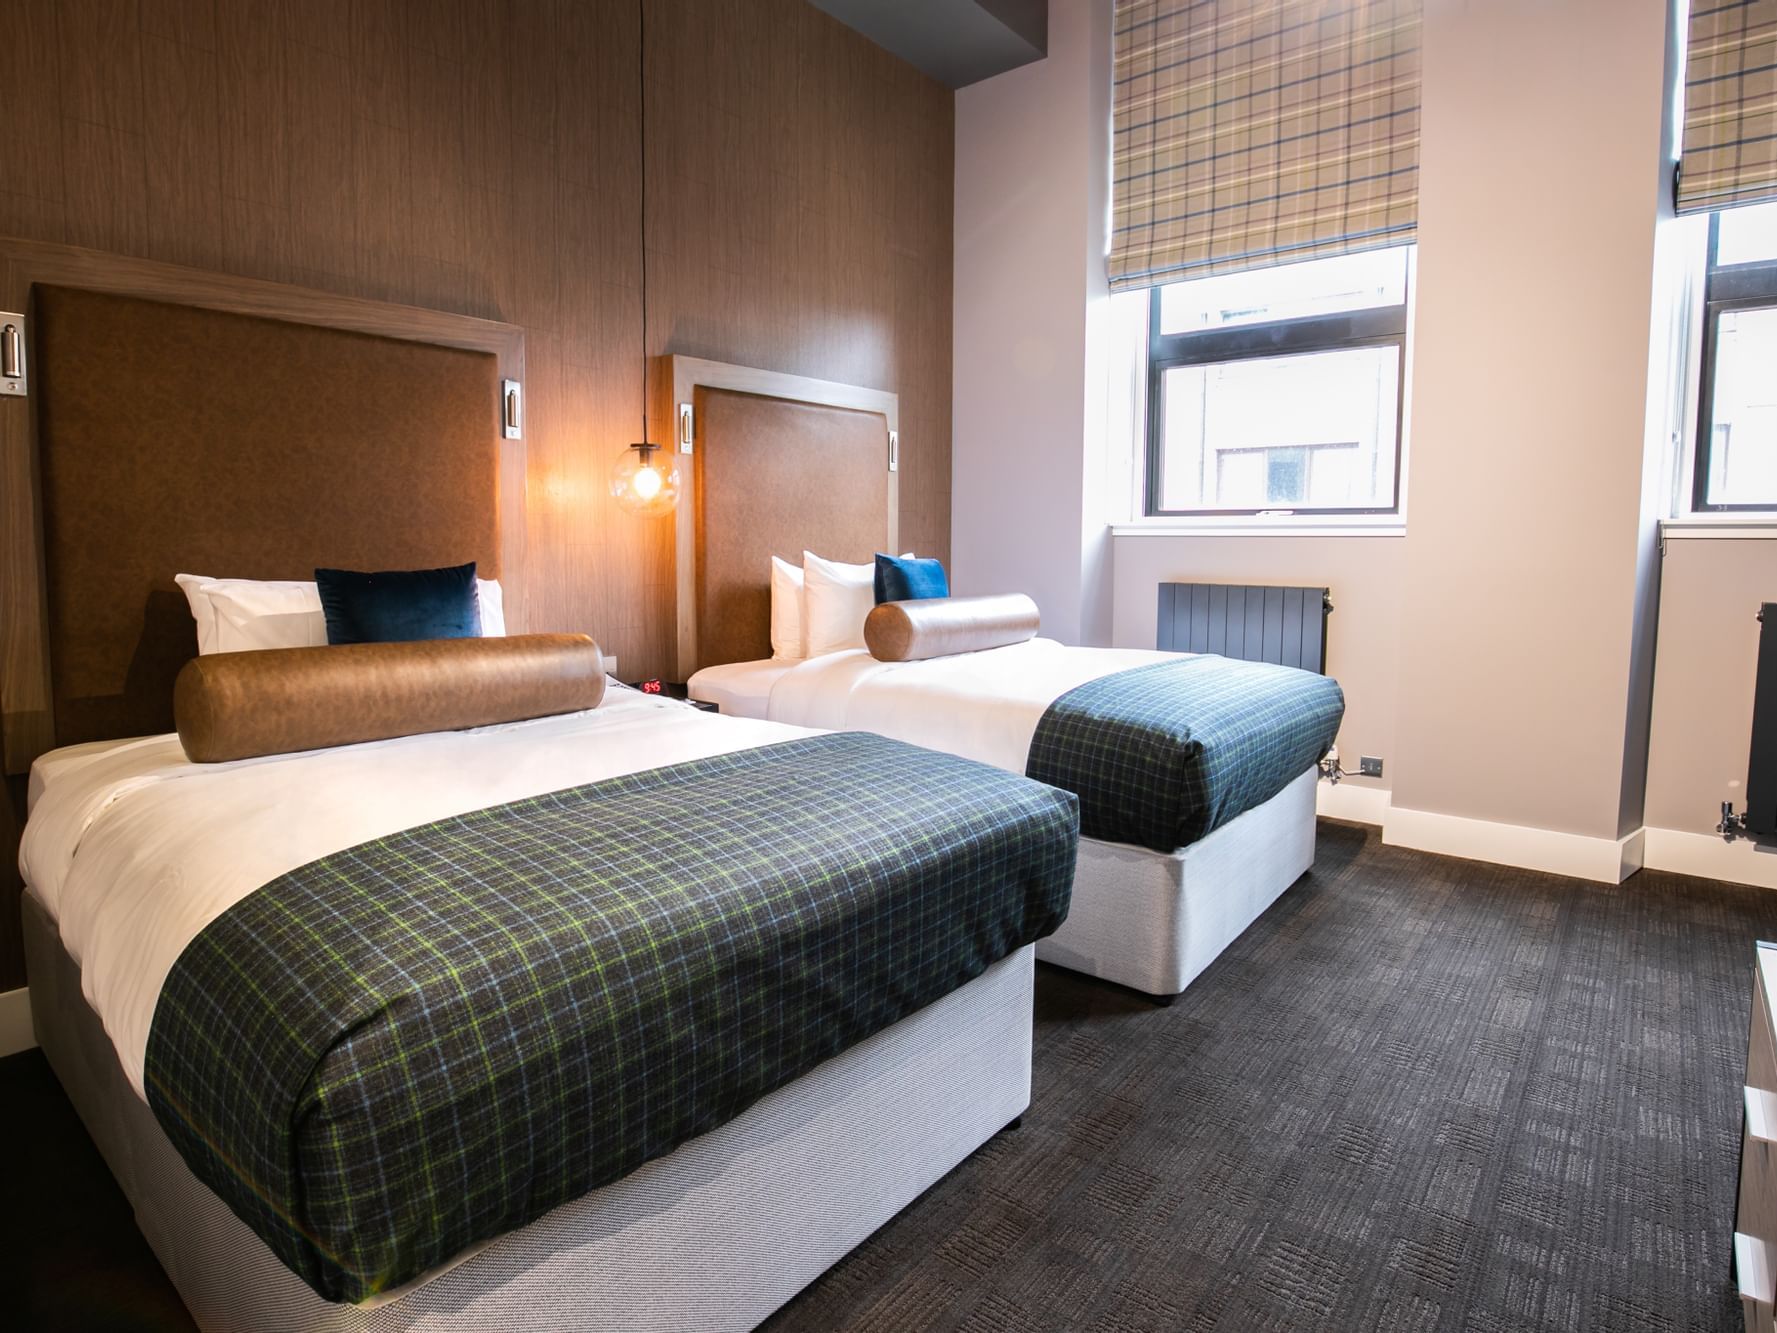 The Signature Two Double Beds Room at Sandman Signature Aberdeen Hotel with two double beds (luxury glencraft mattress)